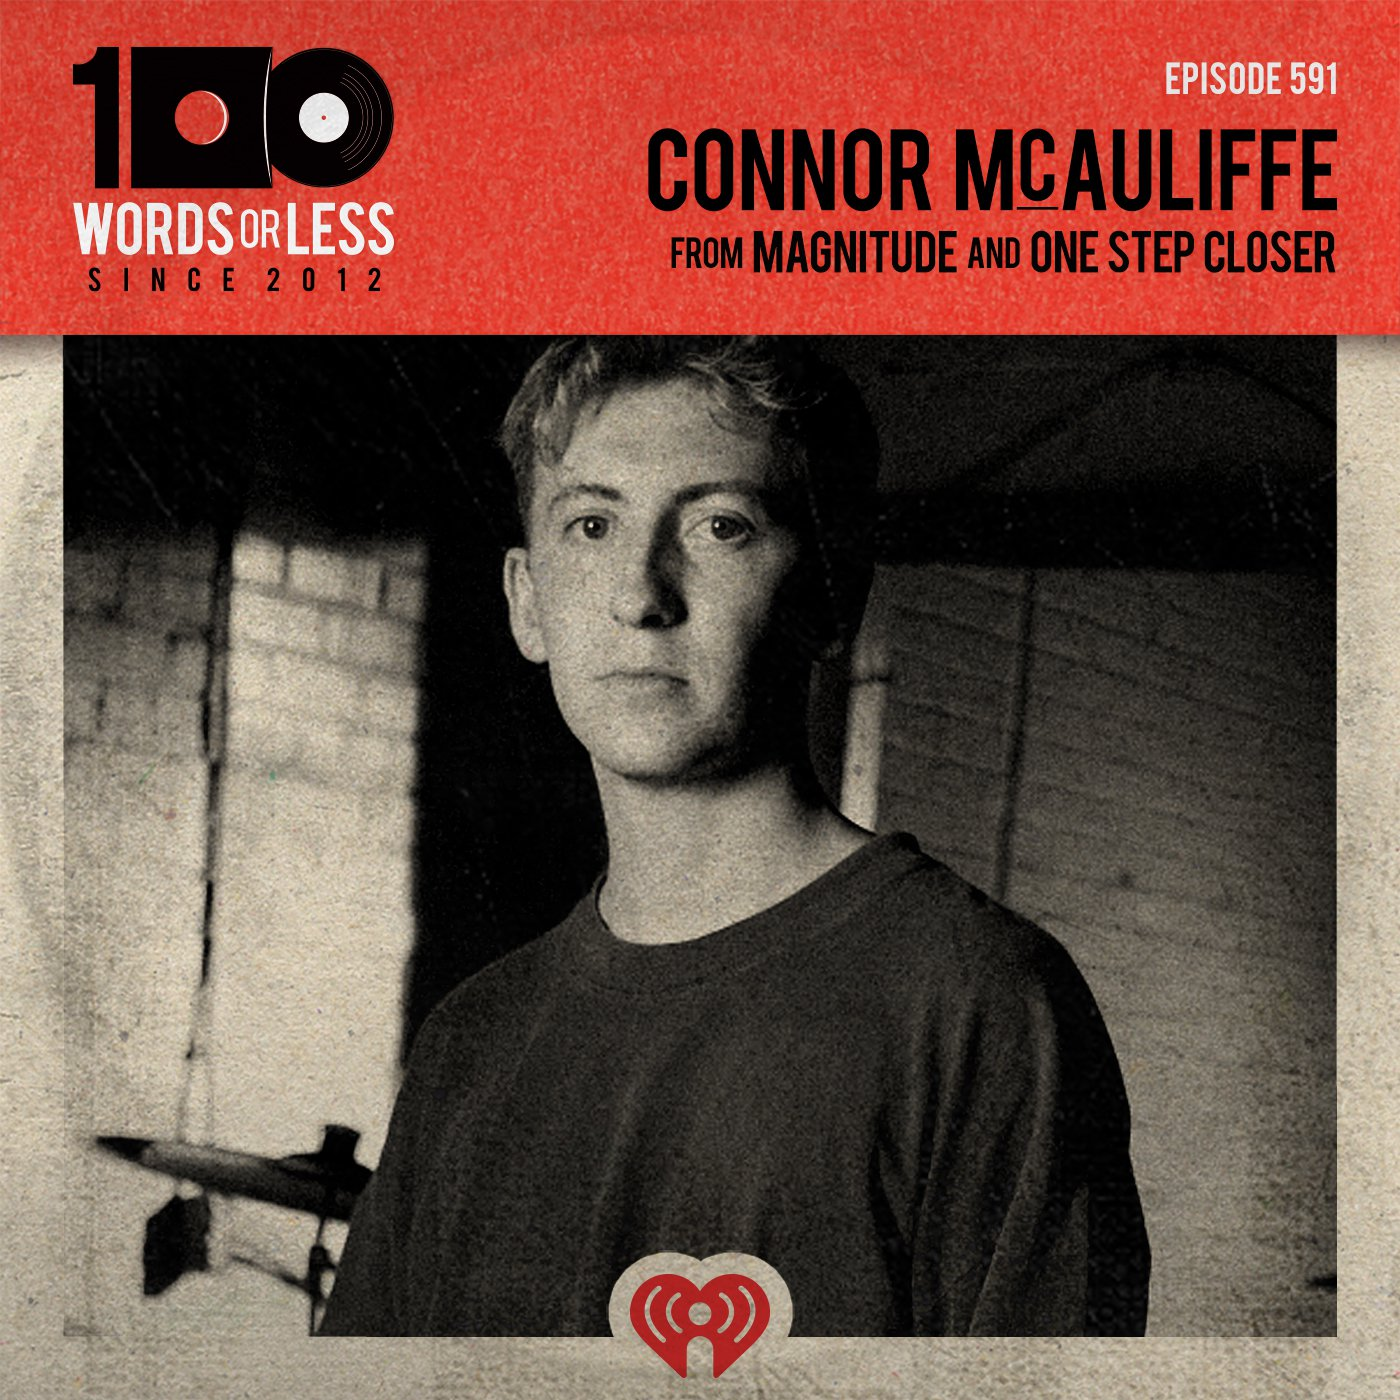 Connor McAuliffe from Magnitude and One Step Closer